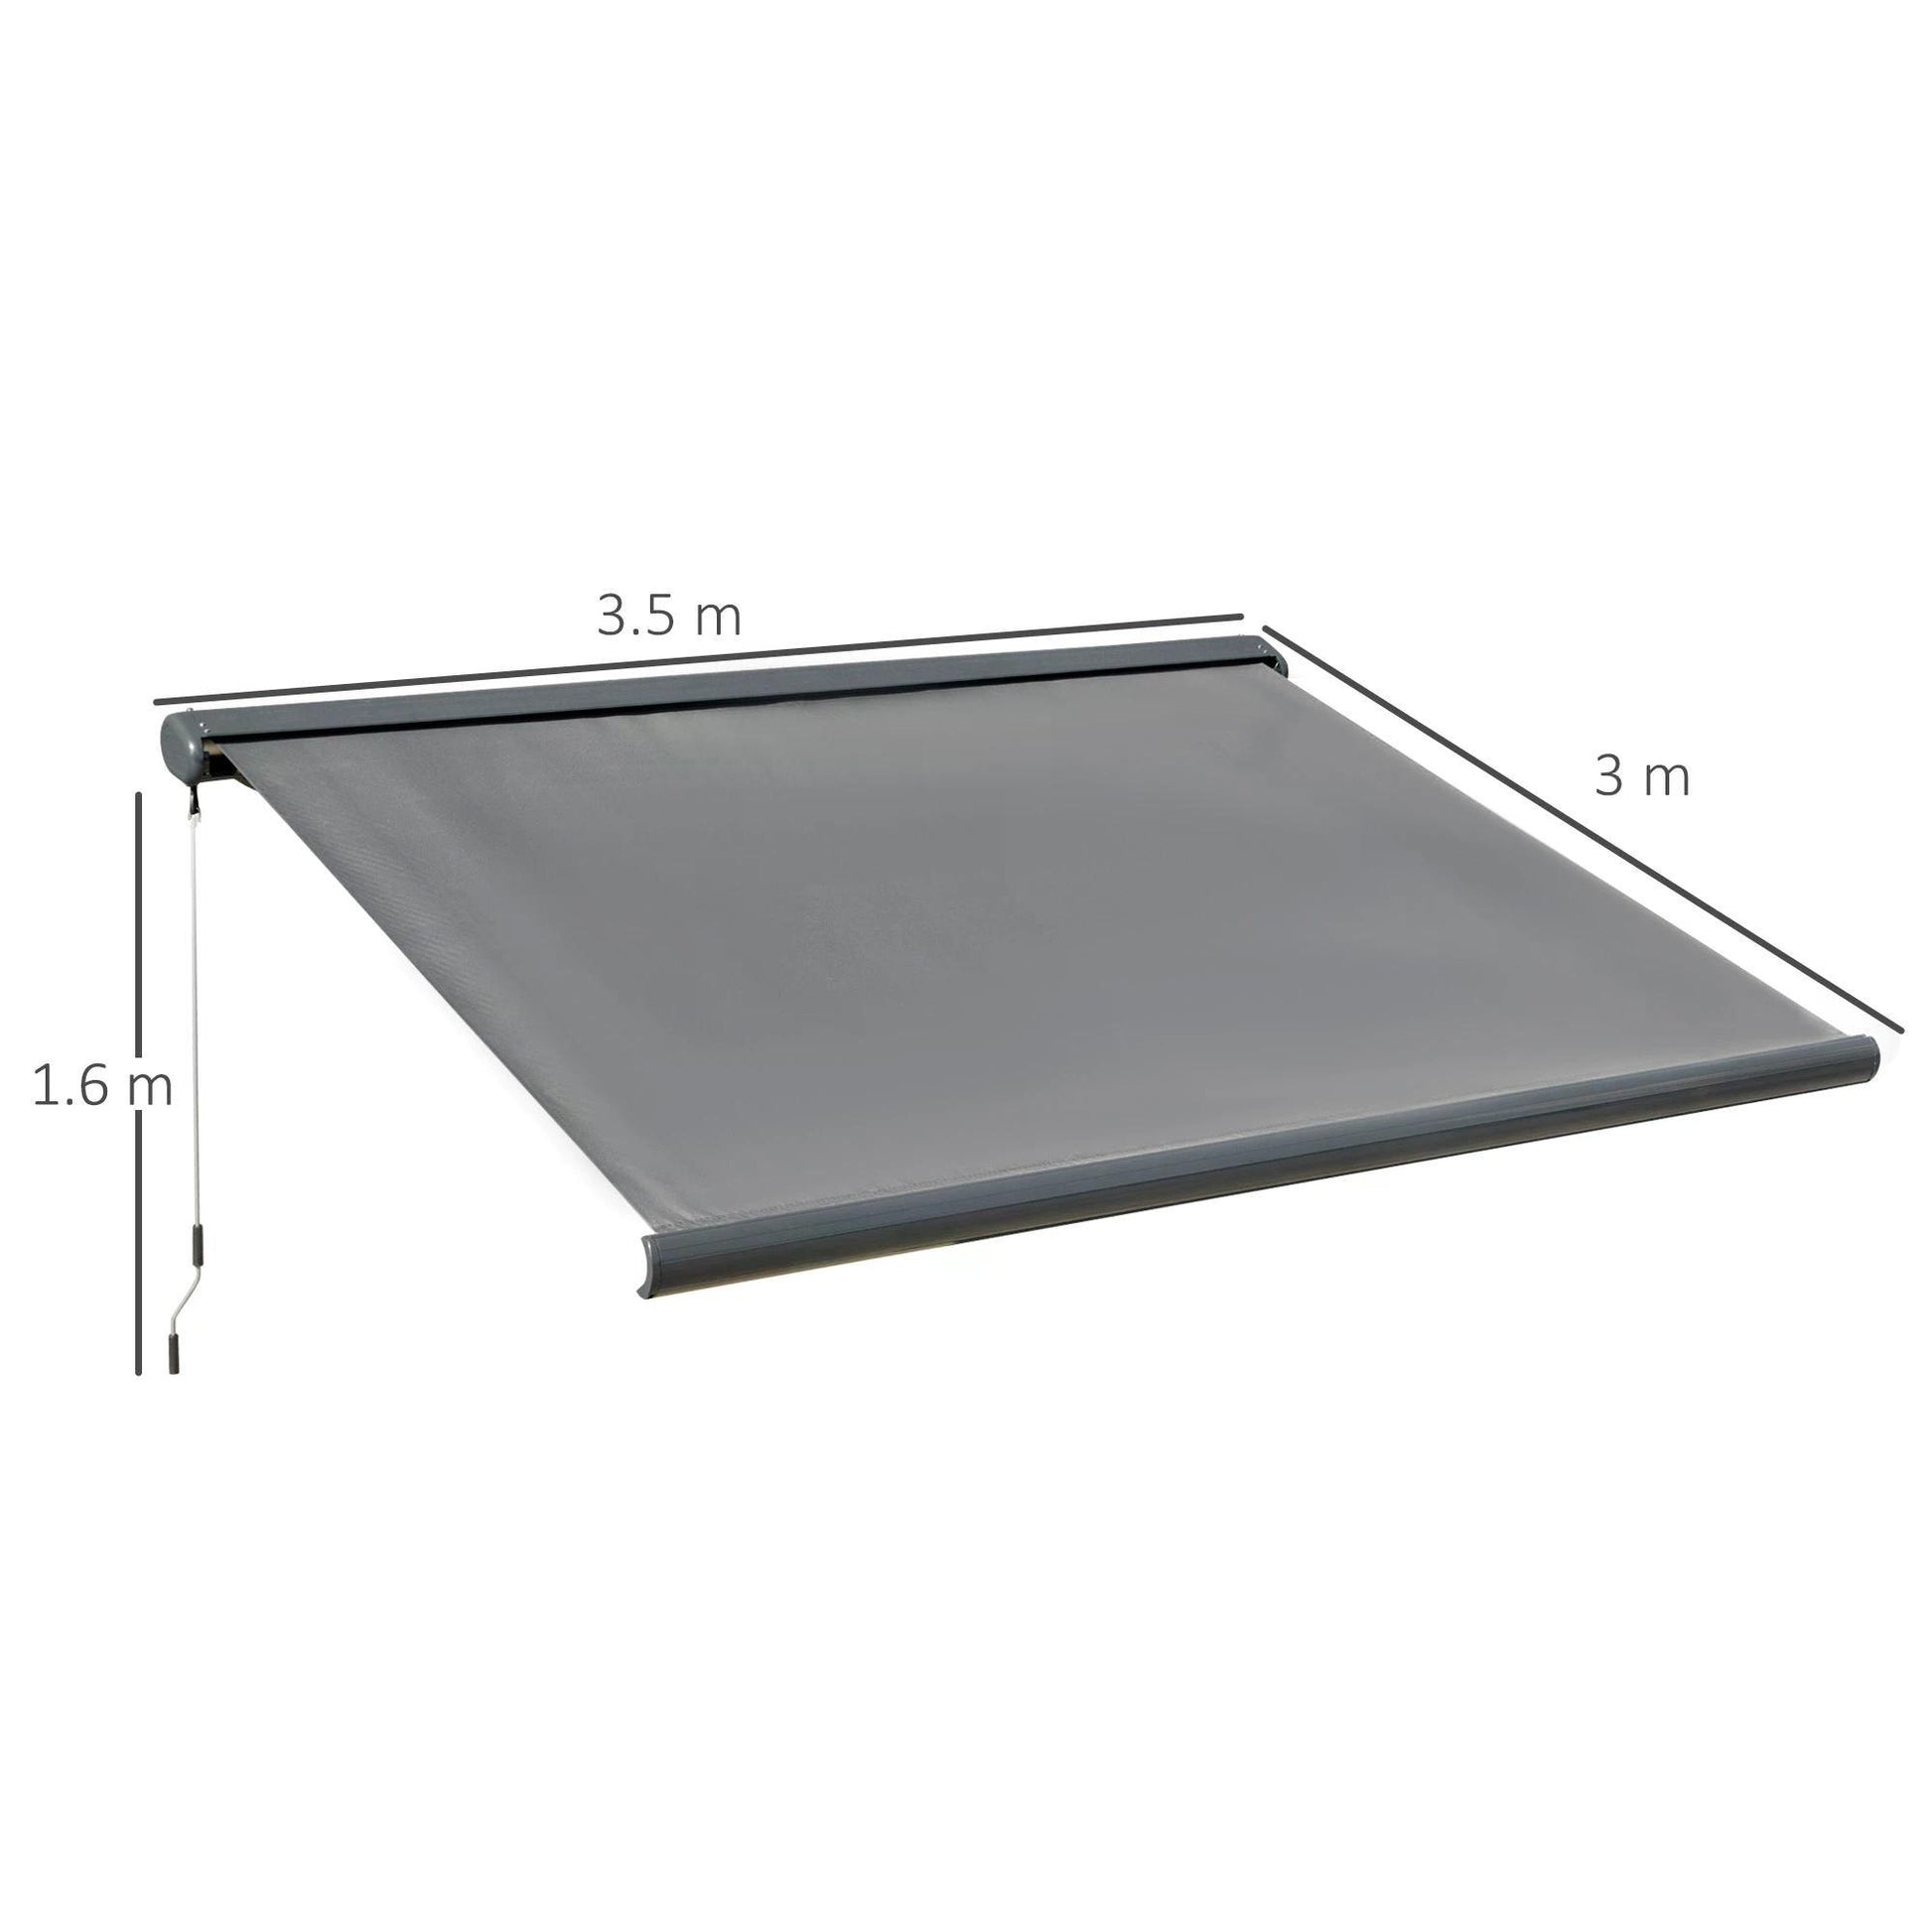 Outsunny 350x300cm Grey Motorised Awning with Remote Control - ALL4U RETAILER LTD